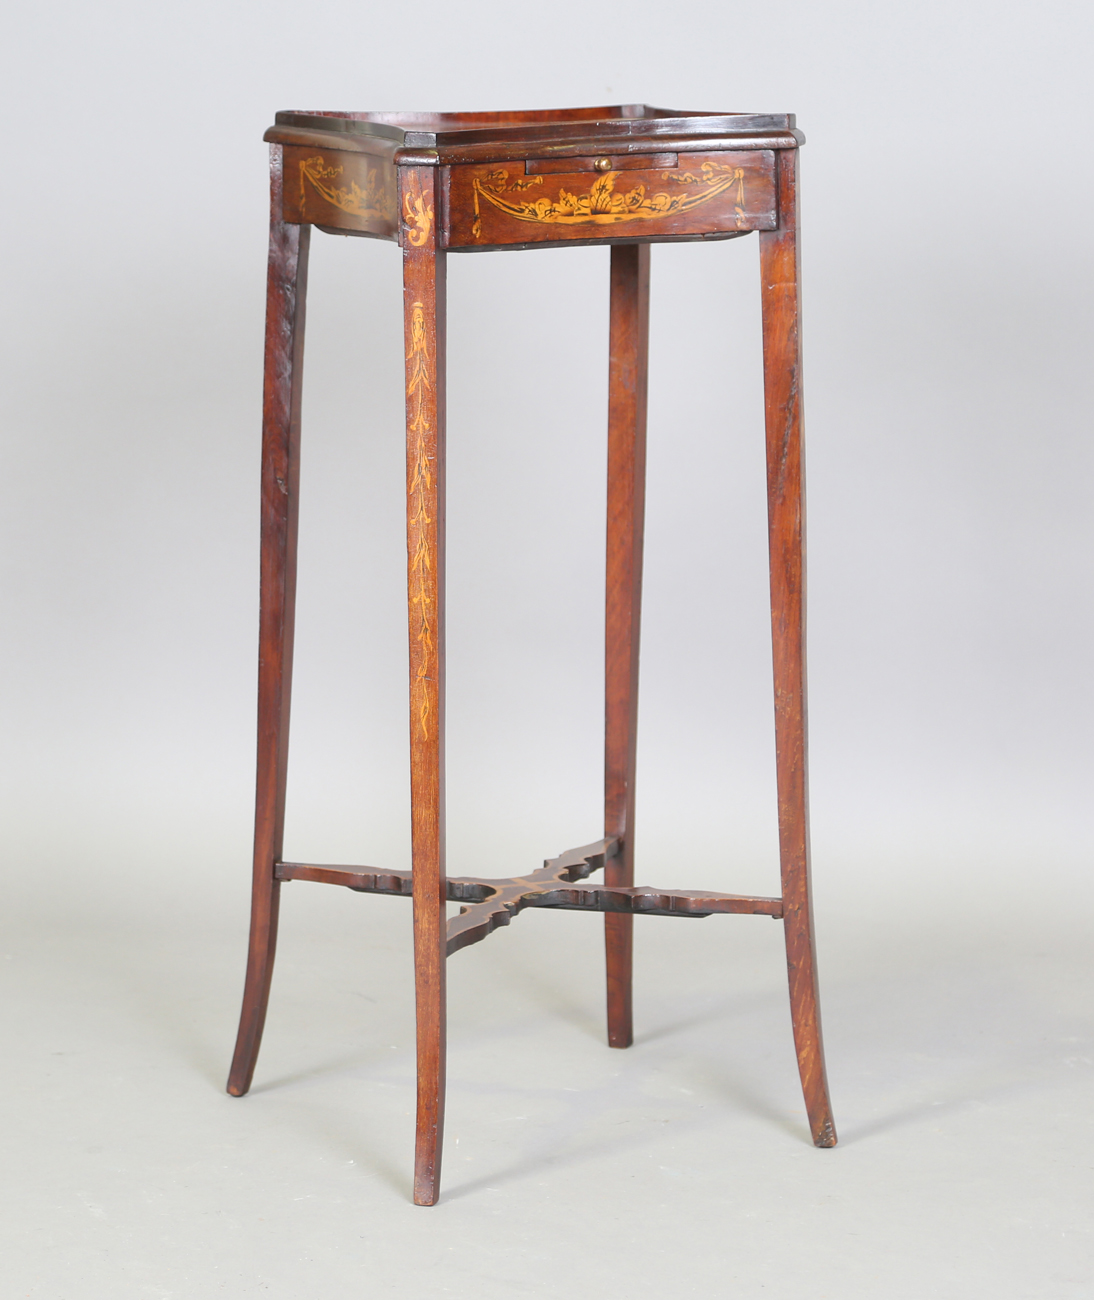 A 19th century Neoclassical Revival mahogany and inlaid kettle stand, the shaped top above a pull-